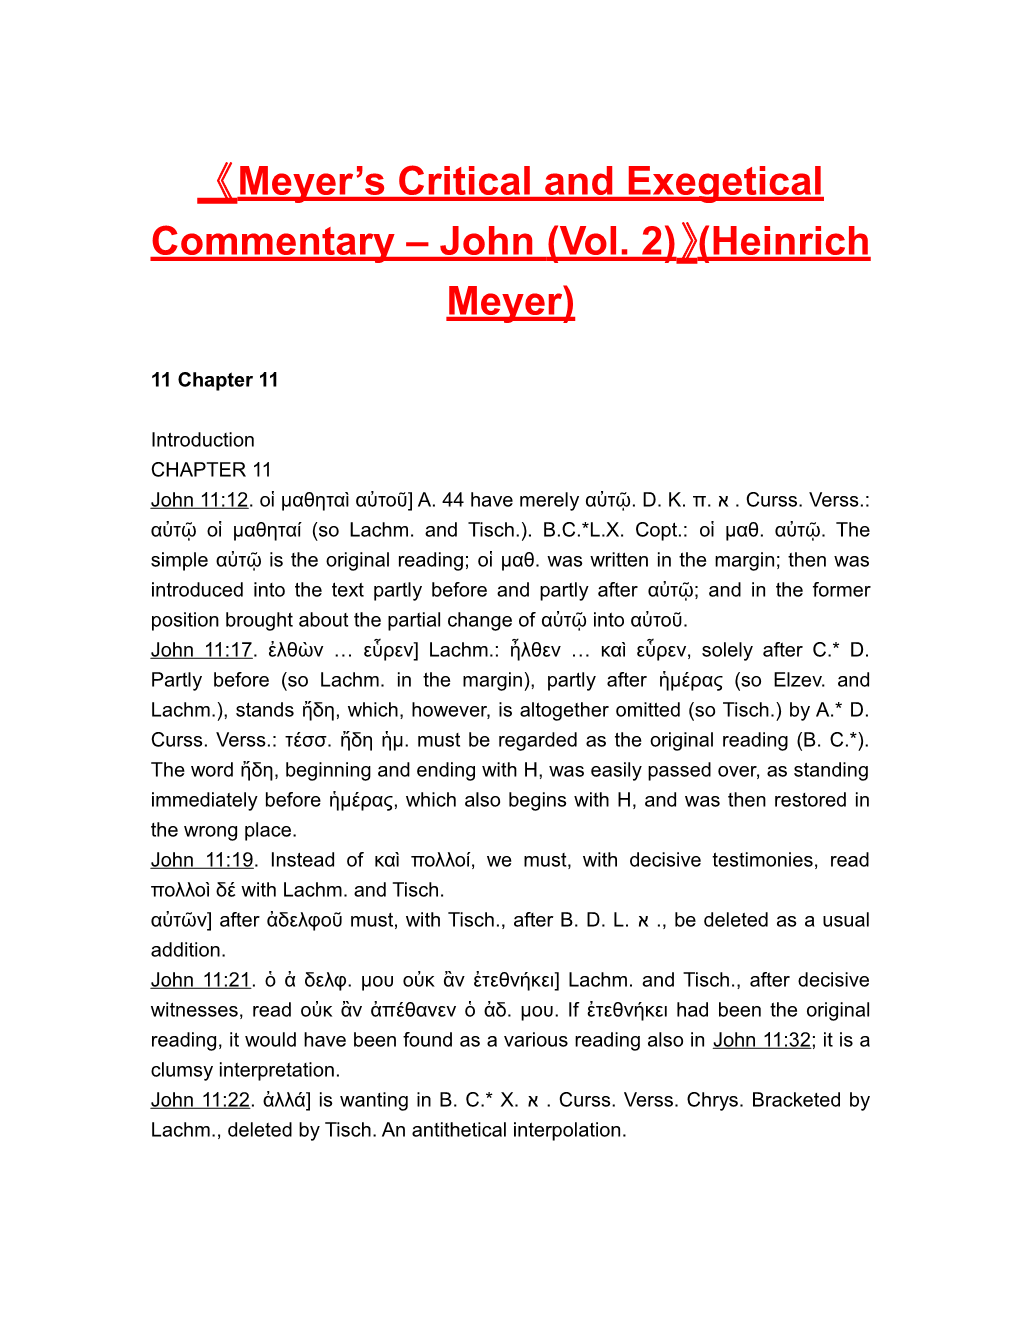 Meyer S Critical and Exegetical Commentary John(Vol. 2) (Heinrich Meyer)